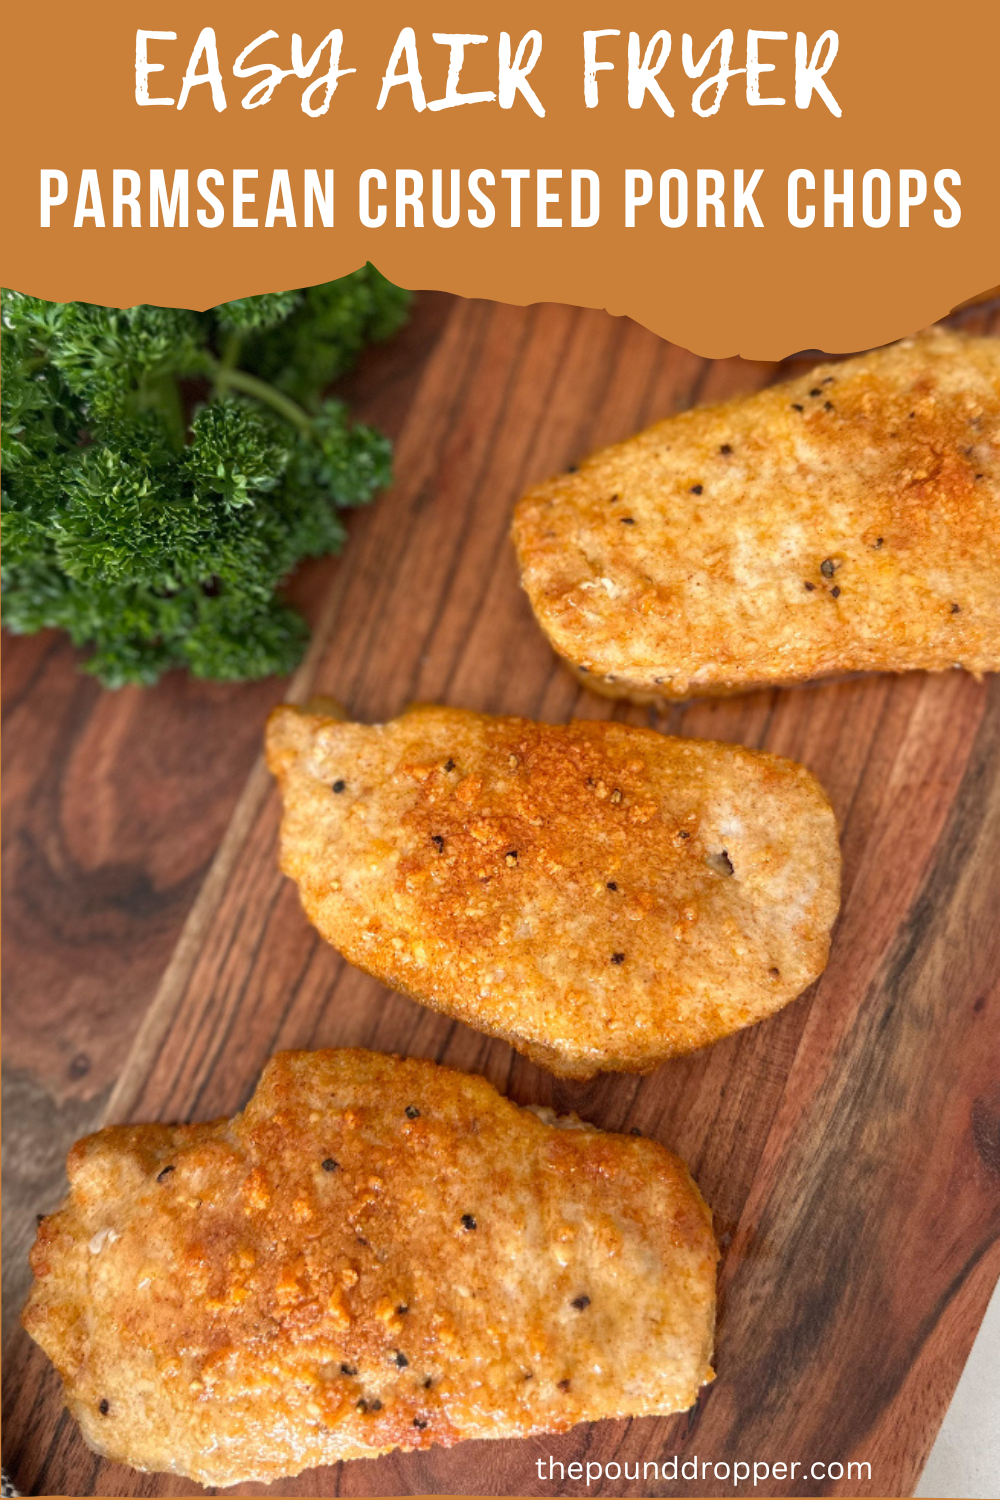 These Easy Air Fry Parmesan Crusted Pork Chops are tender, juicy and have amazing flavor! These make for an easy dinner recipe that the entire family will love! These Easy Air Fry Parmesan Crusted Pork Chops naturally gluten-free, low carb, and packed with protein! via @pounddropper